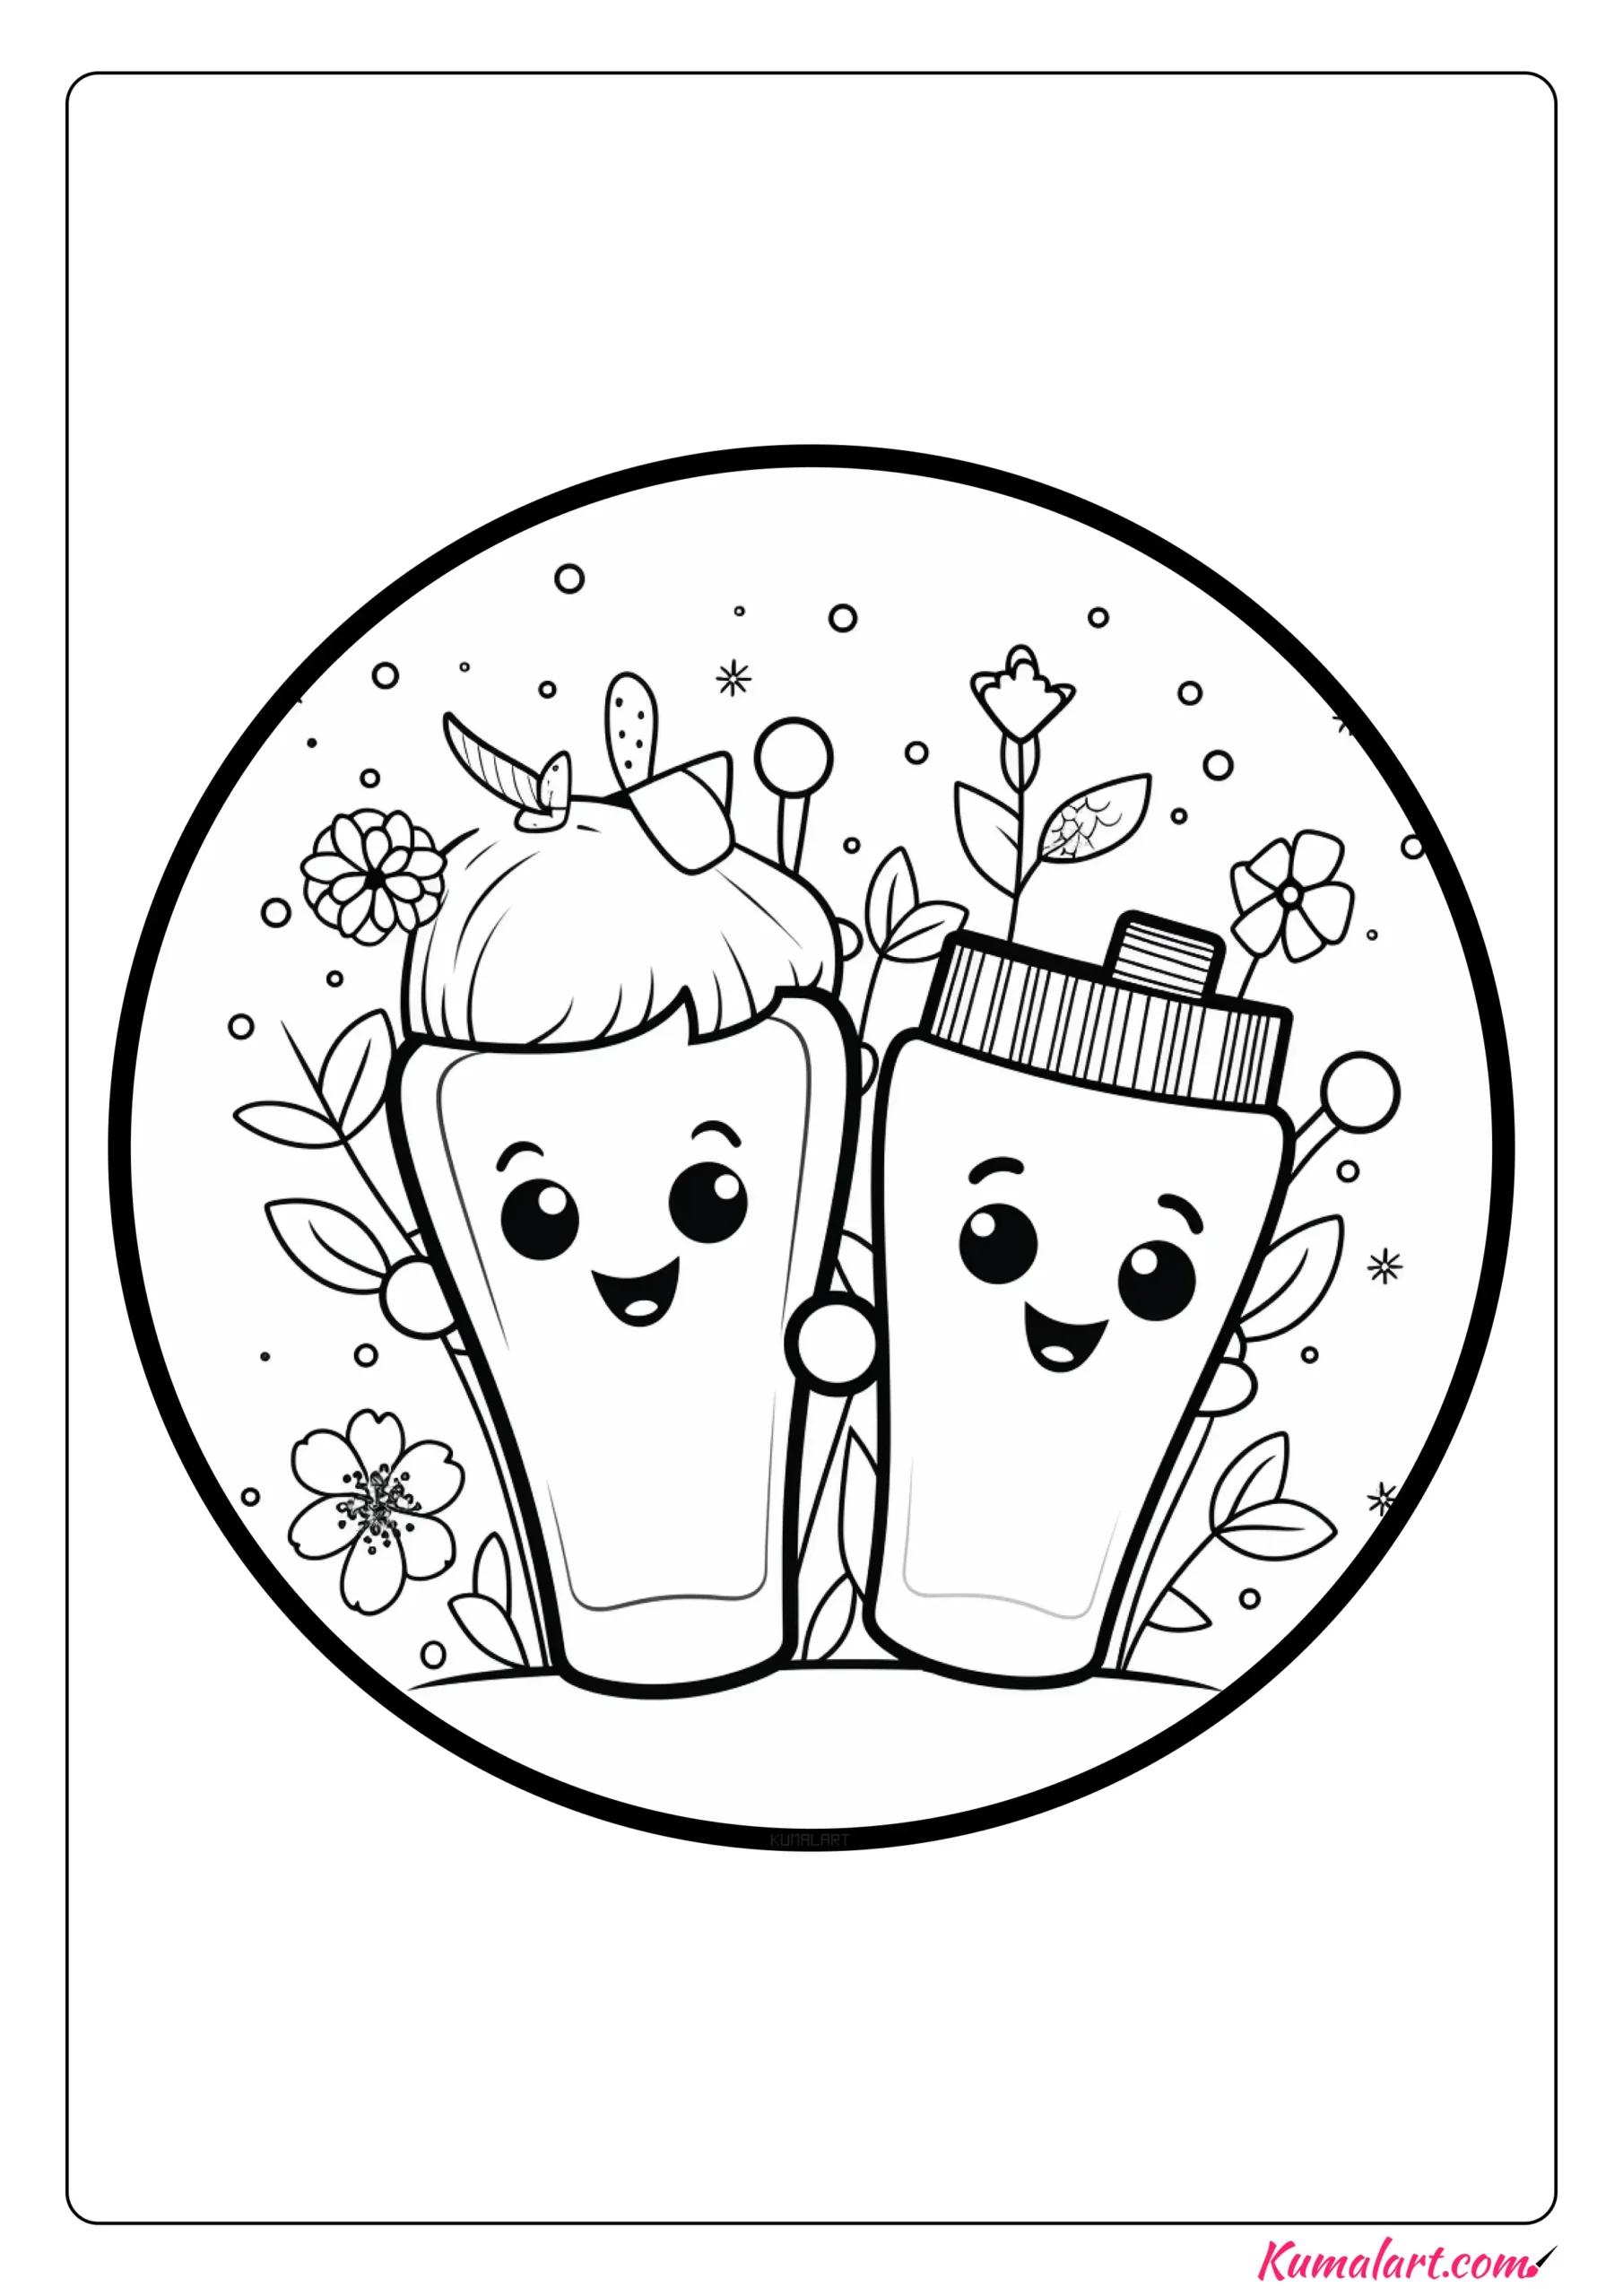 Cute Tooth Brushing Coloring Page